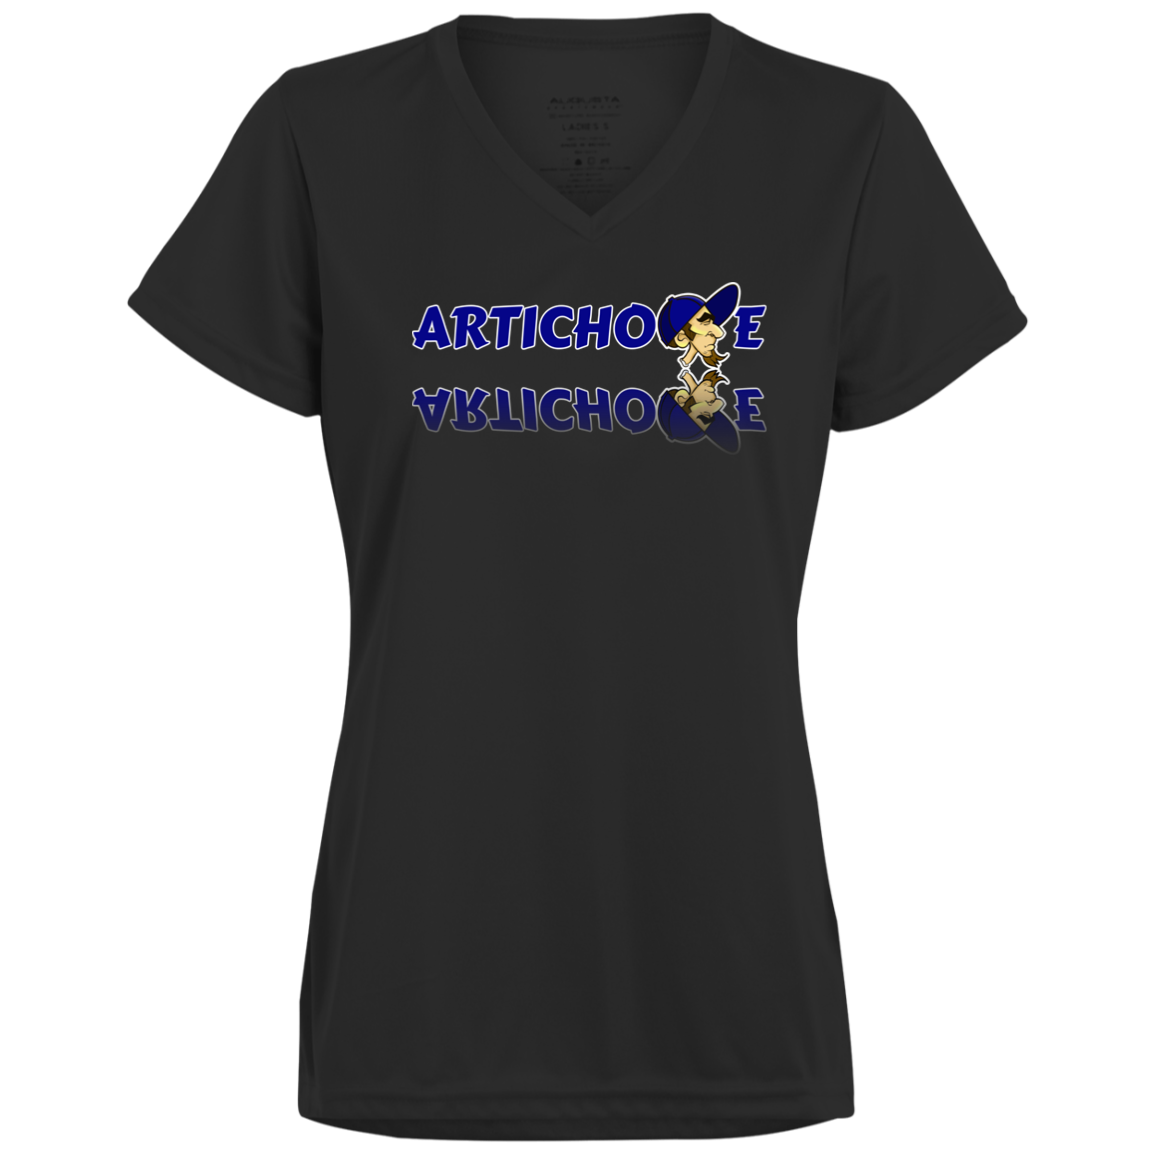 ZZ#20 ArtichokeUSA Characters and Fonts. "Clem" Let’s Create Your Own Design Today. Ladies’ Moisture-Wicking V-Neck Tee